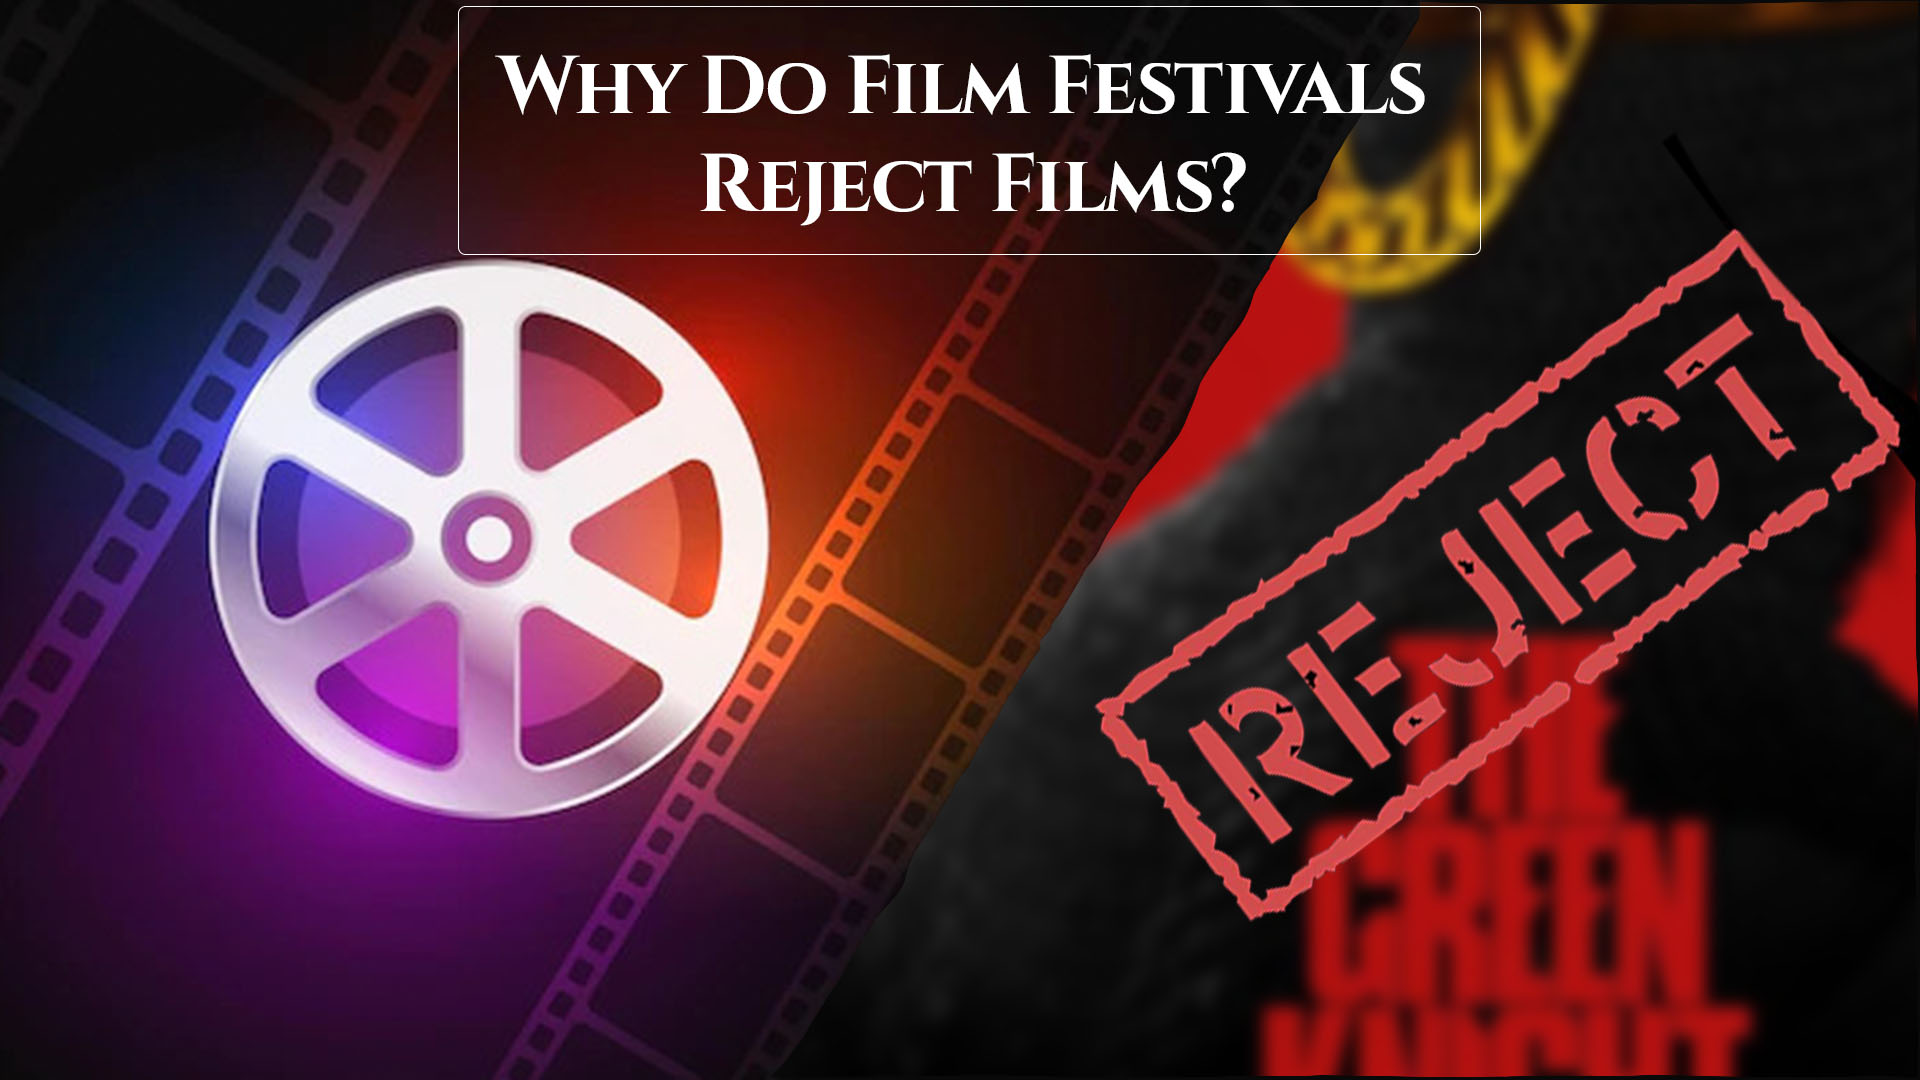 Why Do Film Festivals Reject Films?